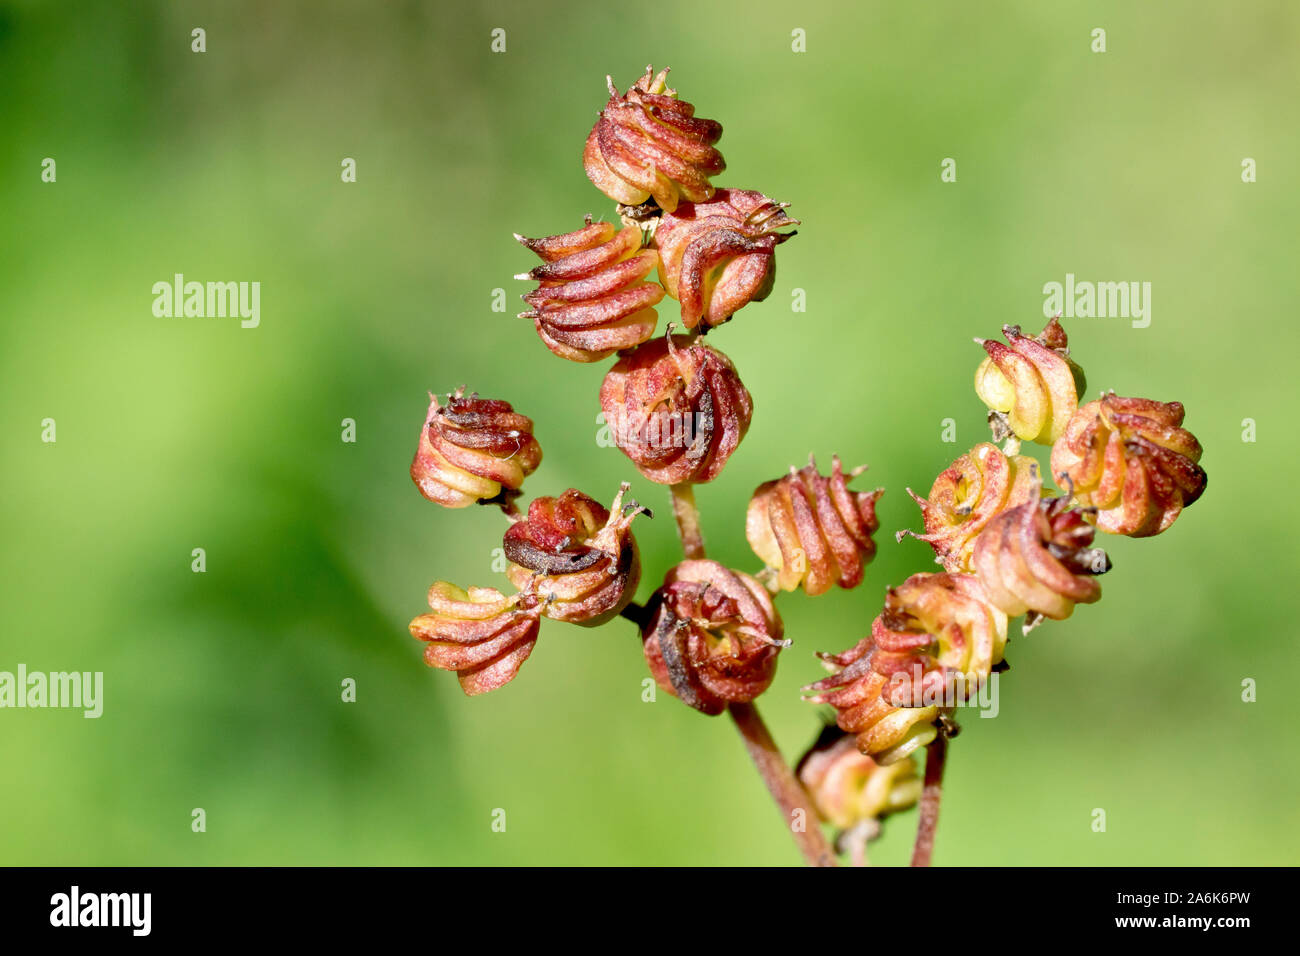 Meadowsweet (filipendula ulmaria), close up showing the tightly spiralled fruits or seed pods of the plant. Stock Photo